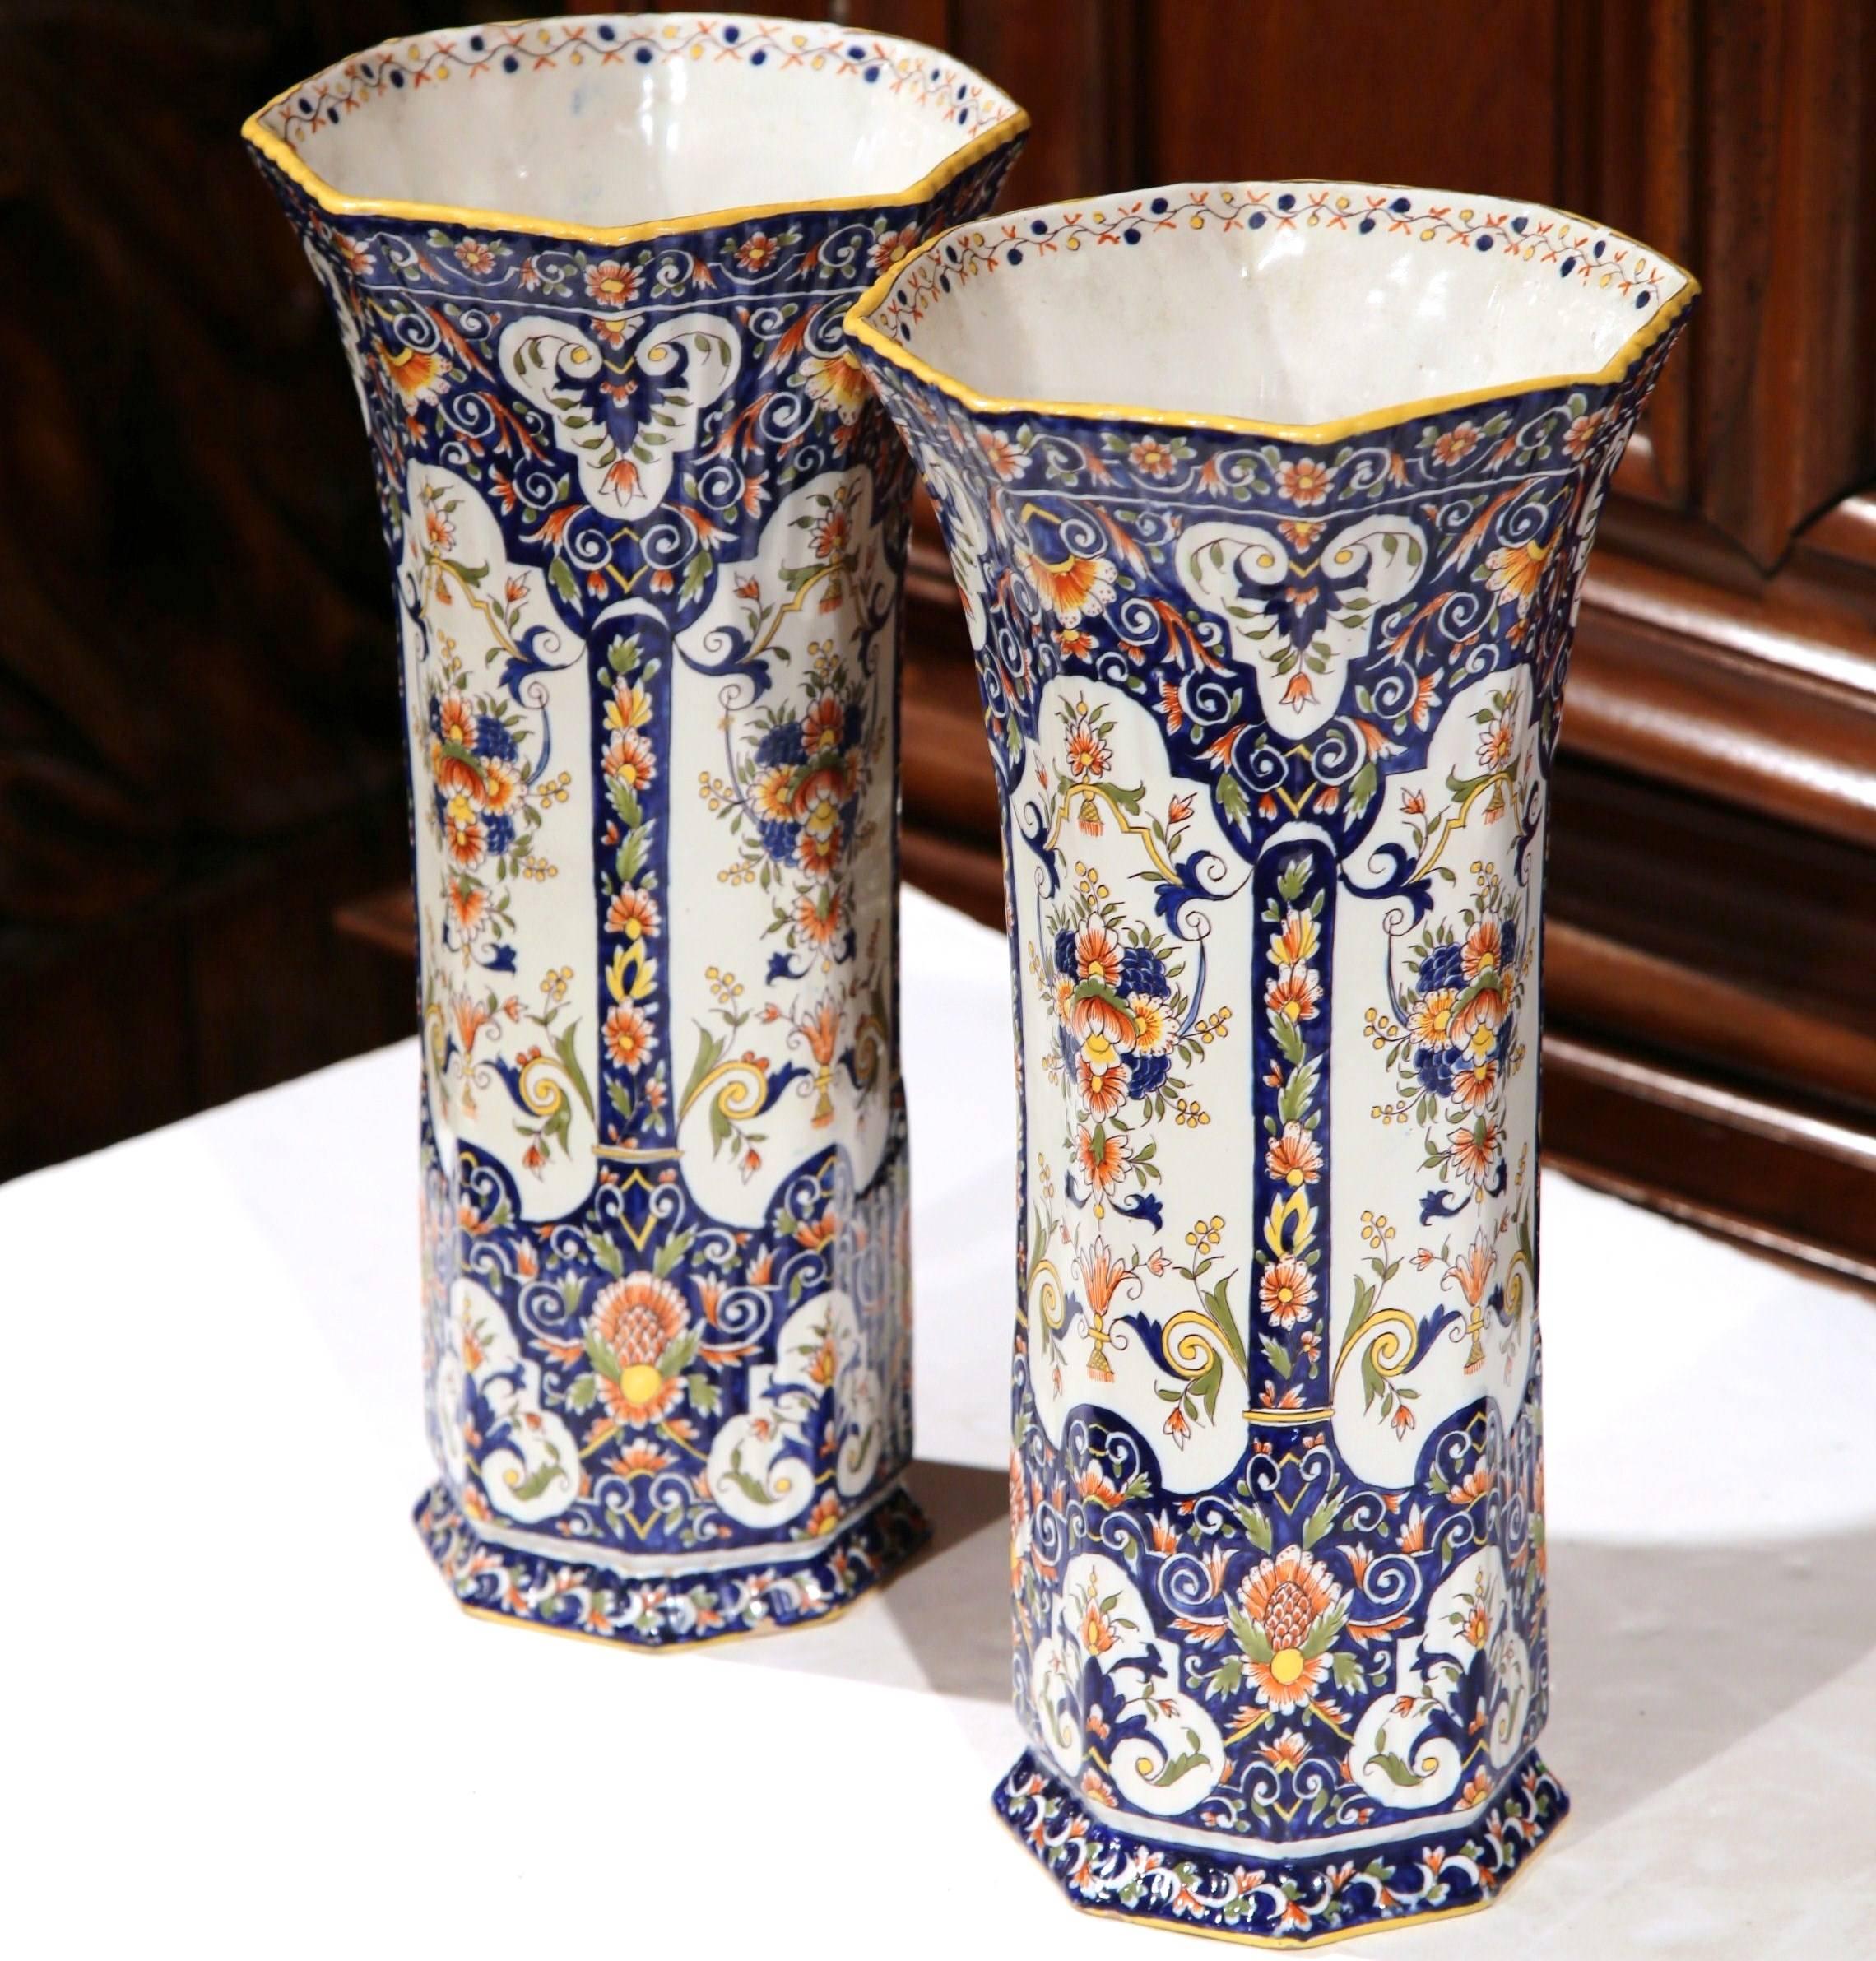 Incorporate beauty and color into your home with this elegant pair of antique ceramic vases, crafted in Rouen, France, circa 1860, the tall colorful vessels feature a circular bottom and a wide mouth at the top with floral motifs. Both vases are in